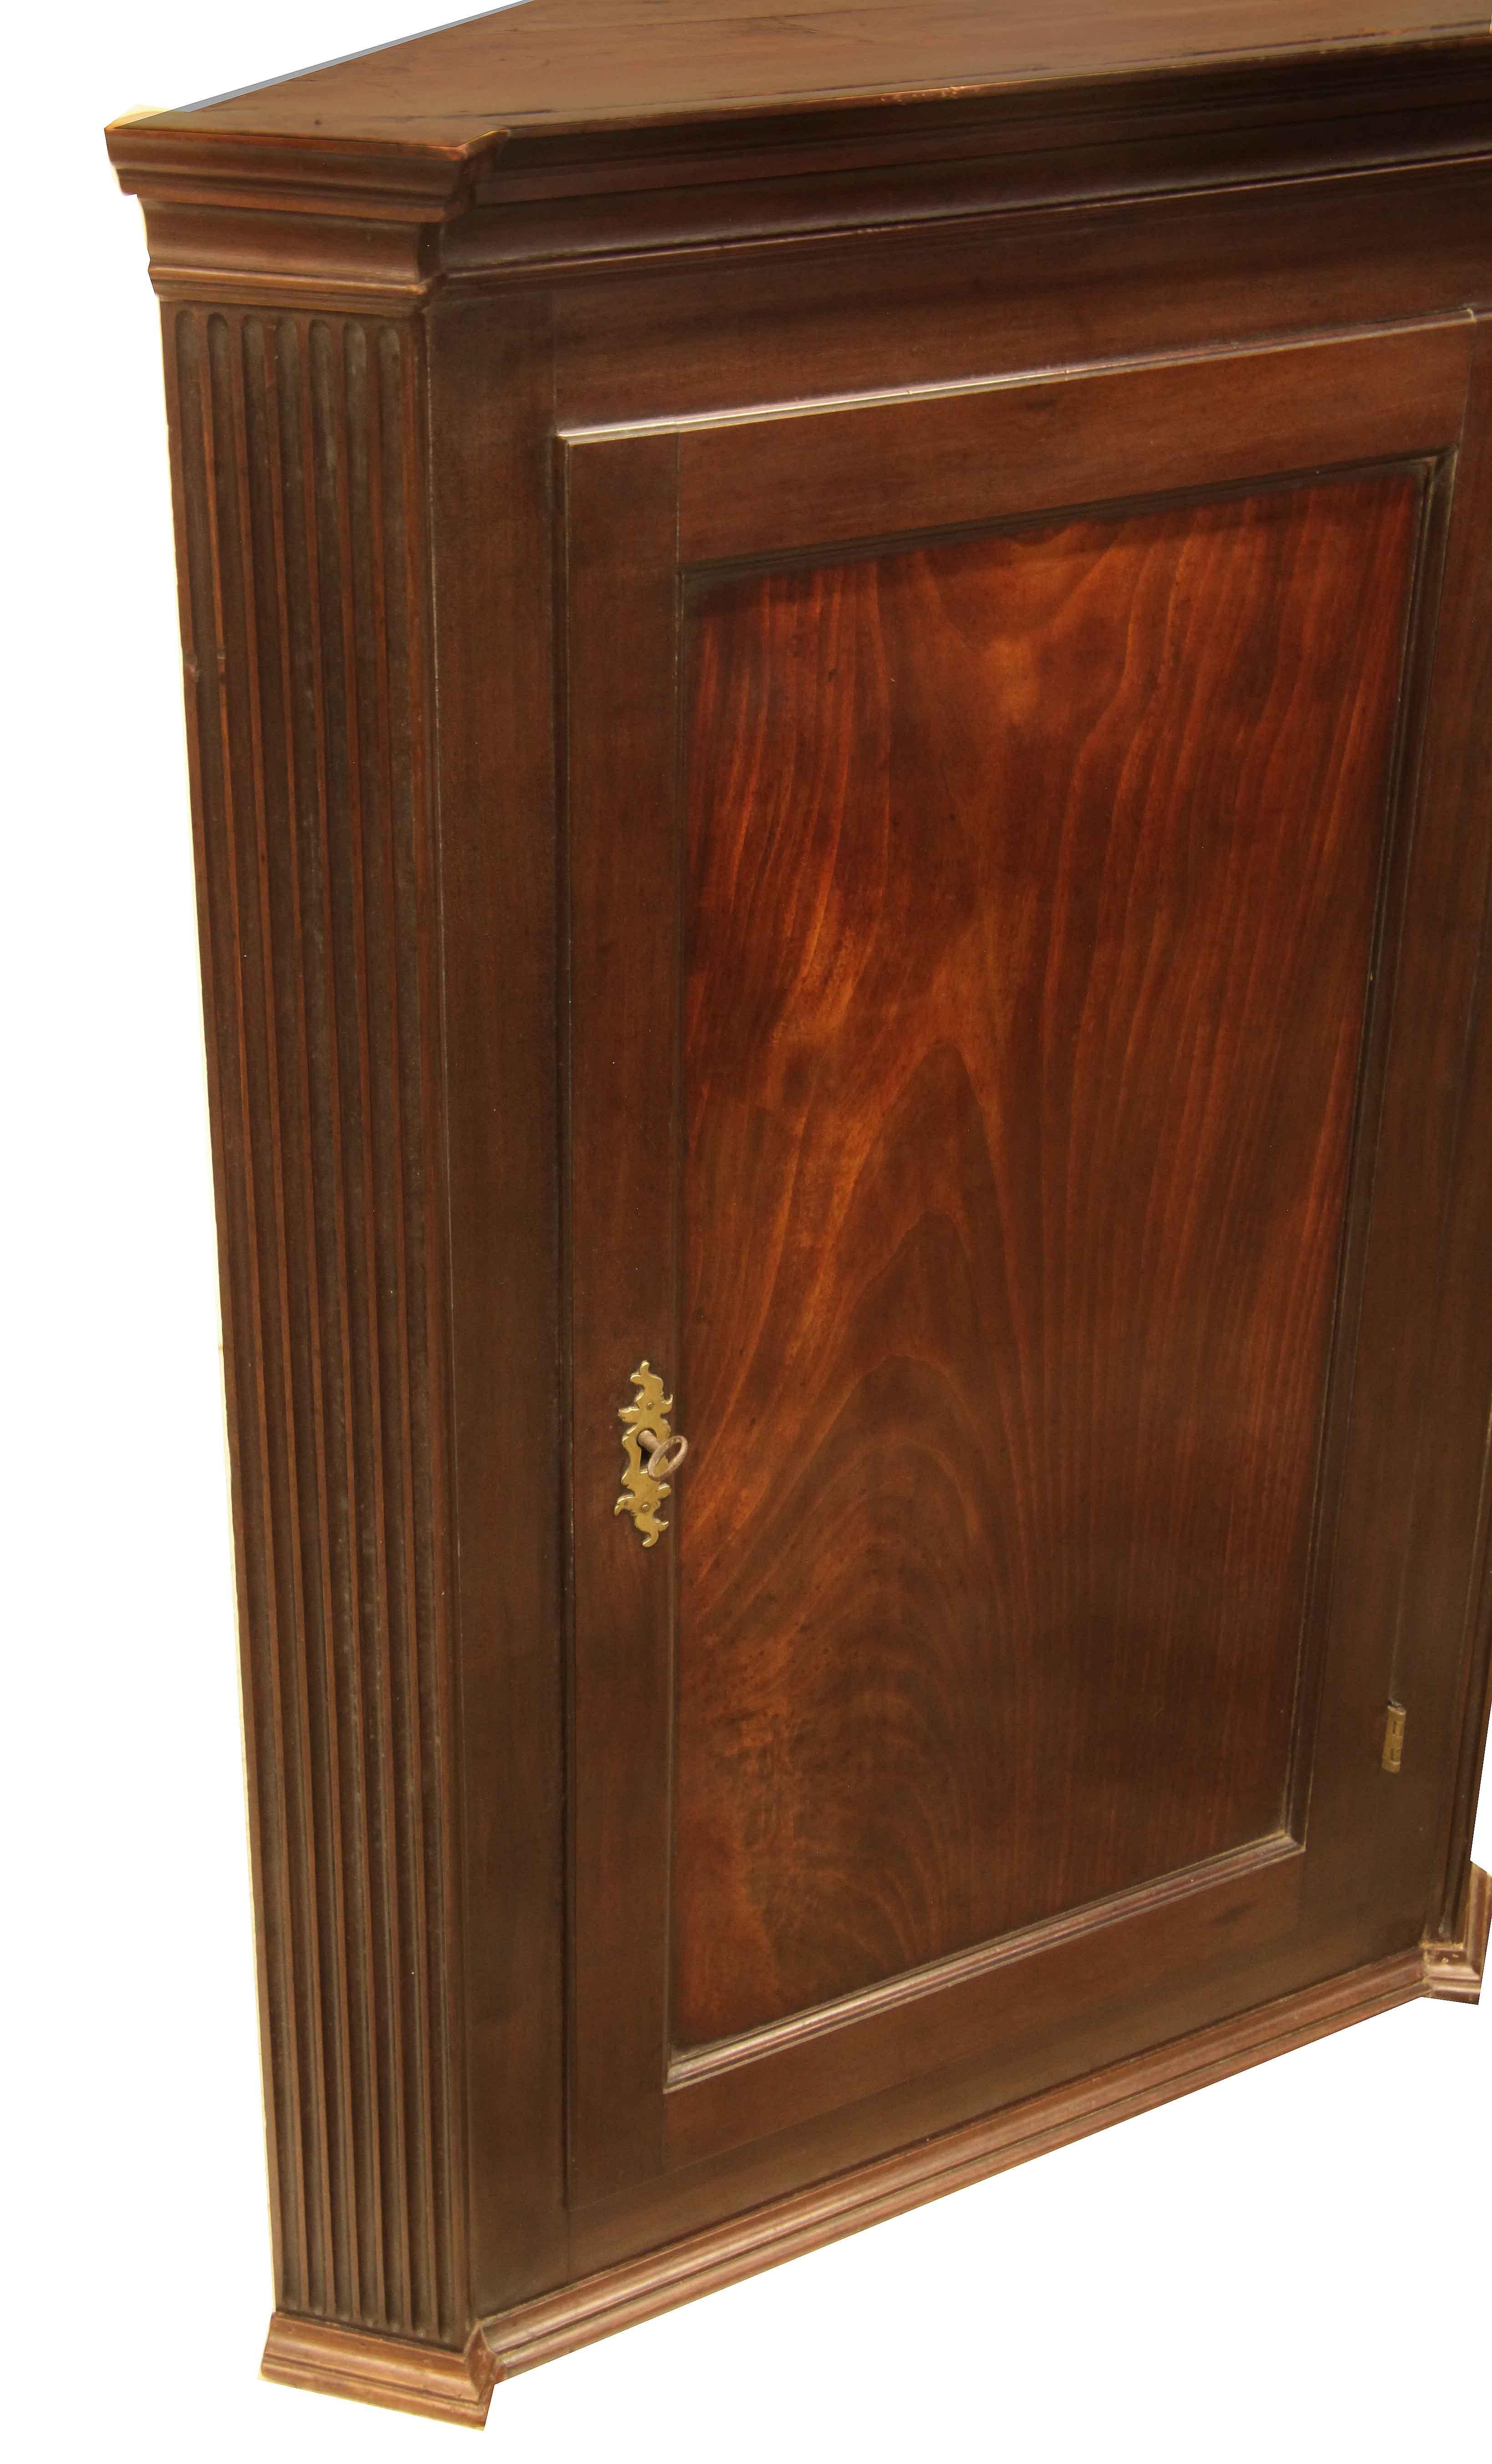 George III hanging corner cupboard, with cove cornice; the returns are blocked out and reeded , the door has a beautiful figured mahogany panel with excellent patina and color, original working lock and key. The interior features three shaped